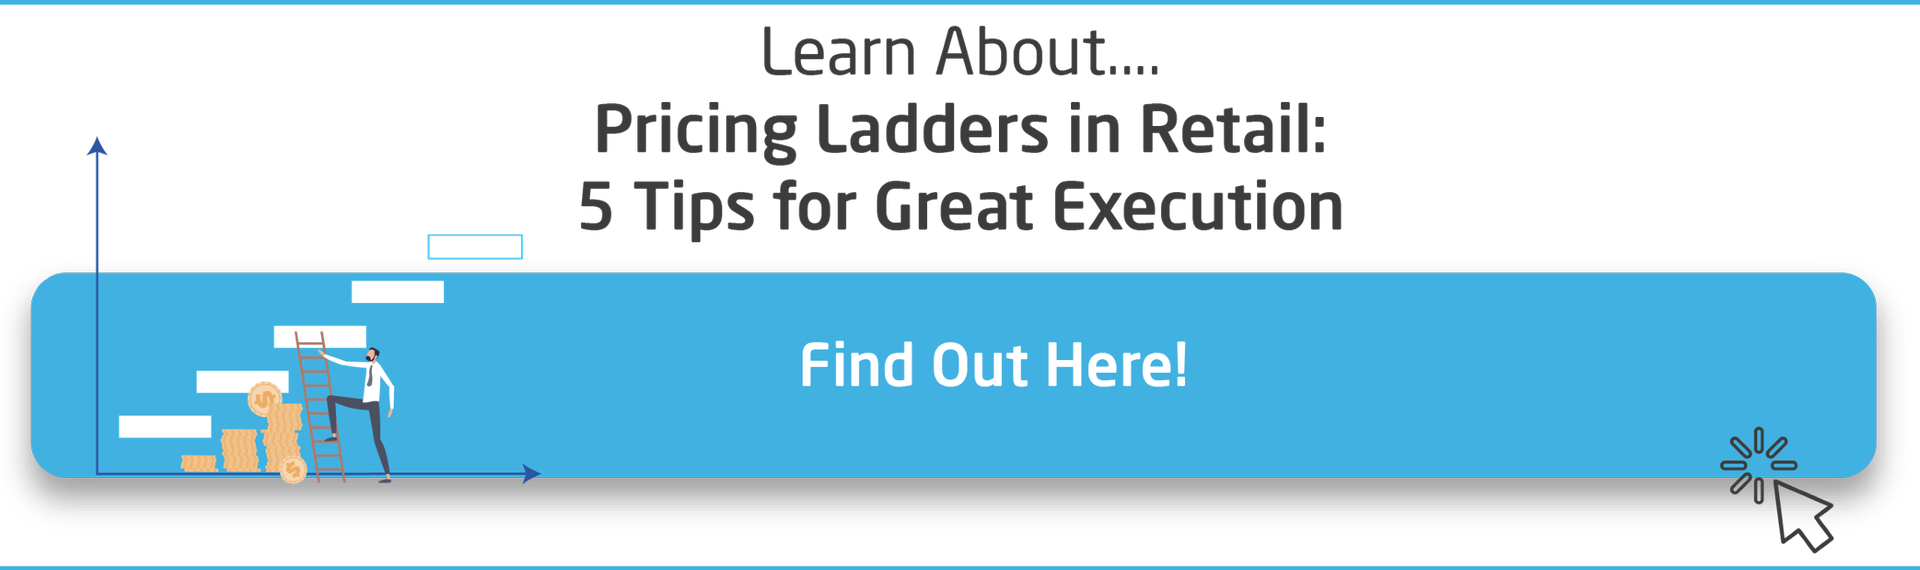 CTA-Pricing-Ladders-in-retail-5-tips-for-great-execution